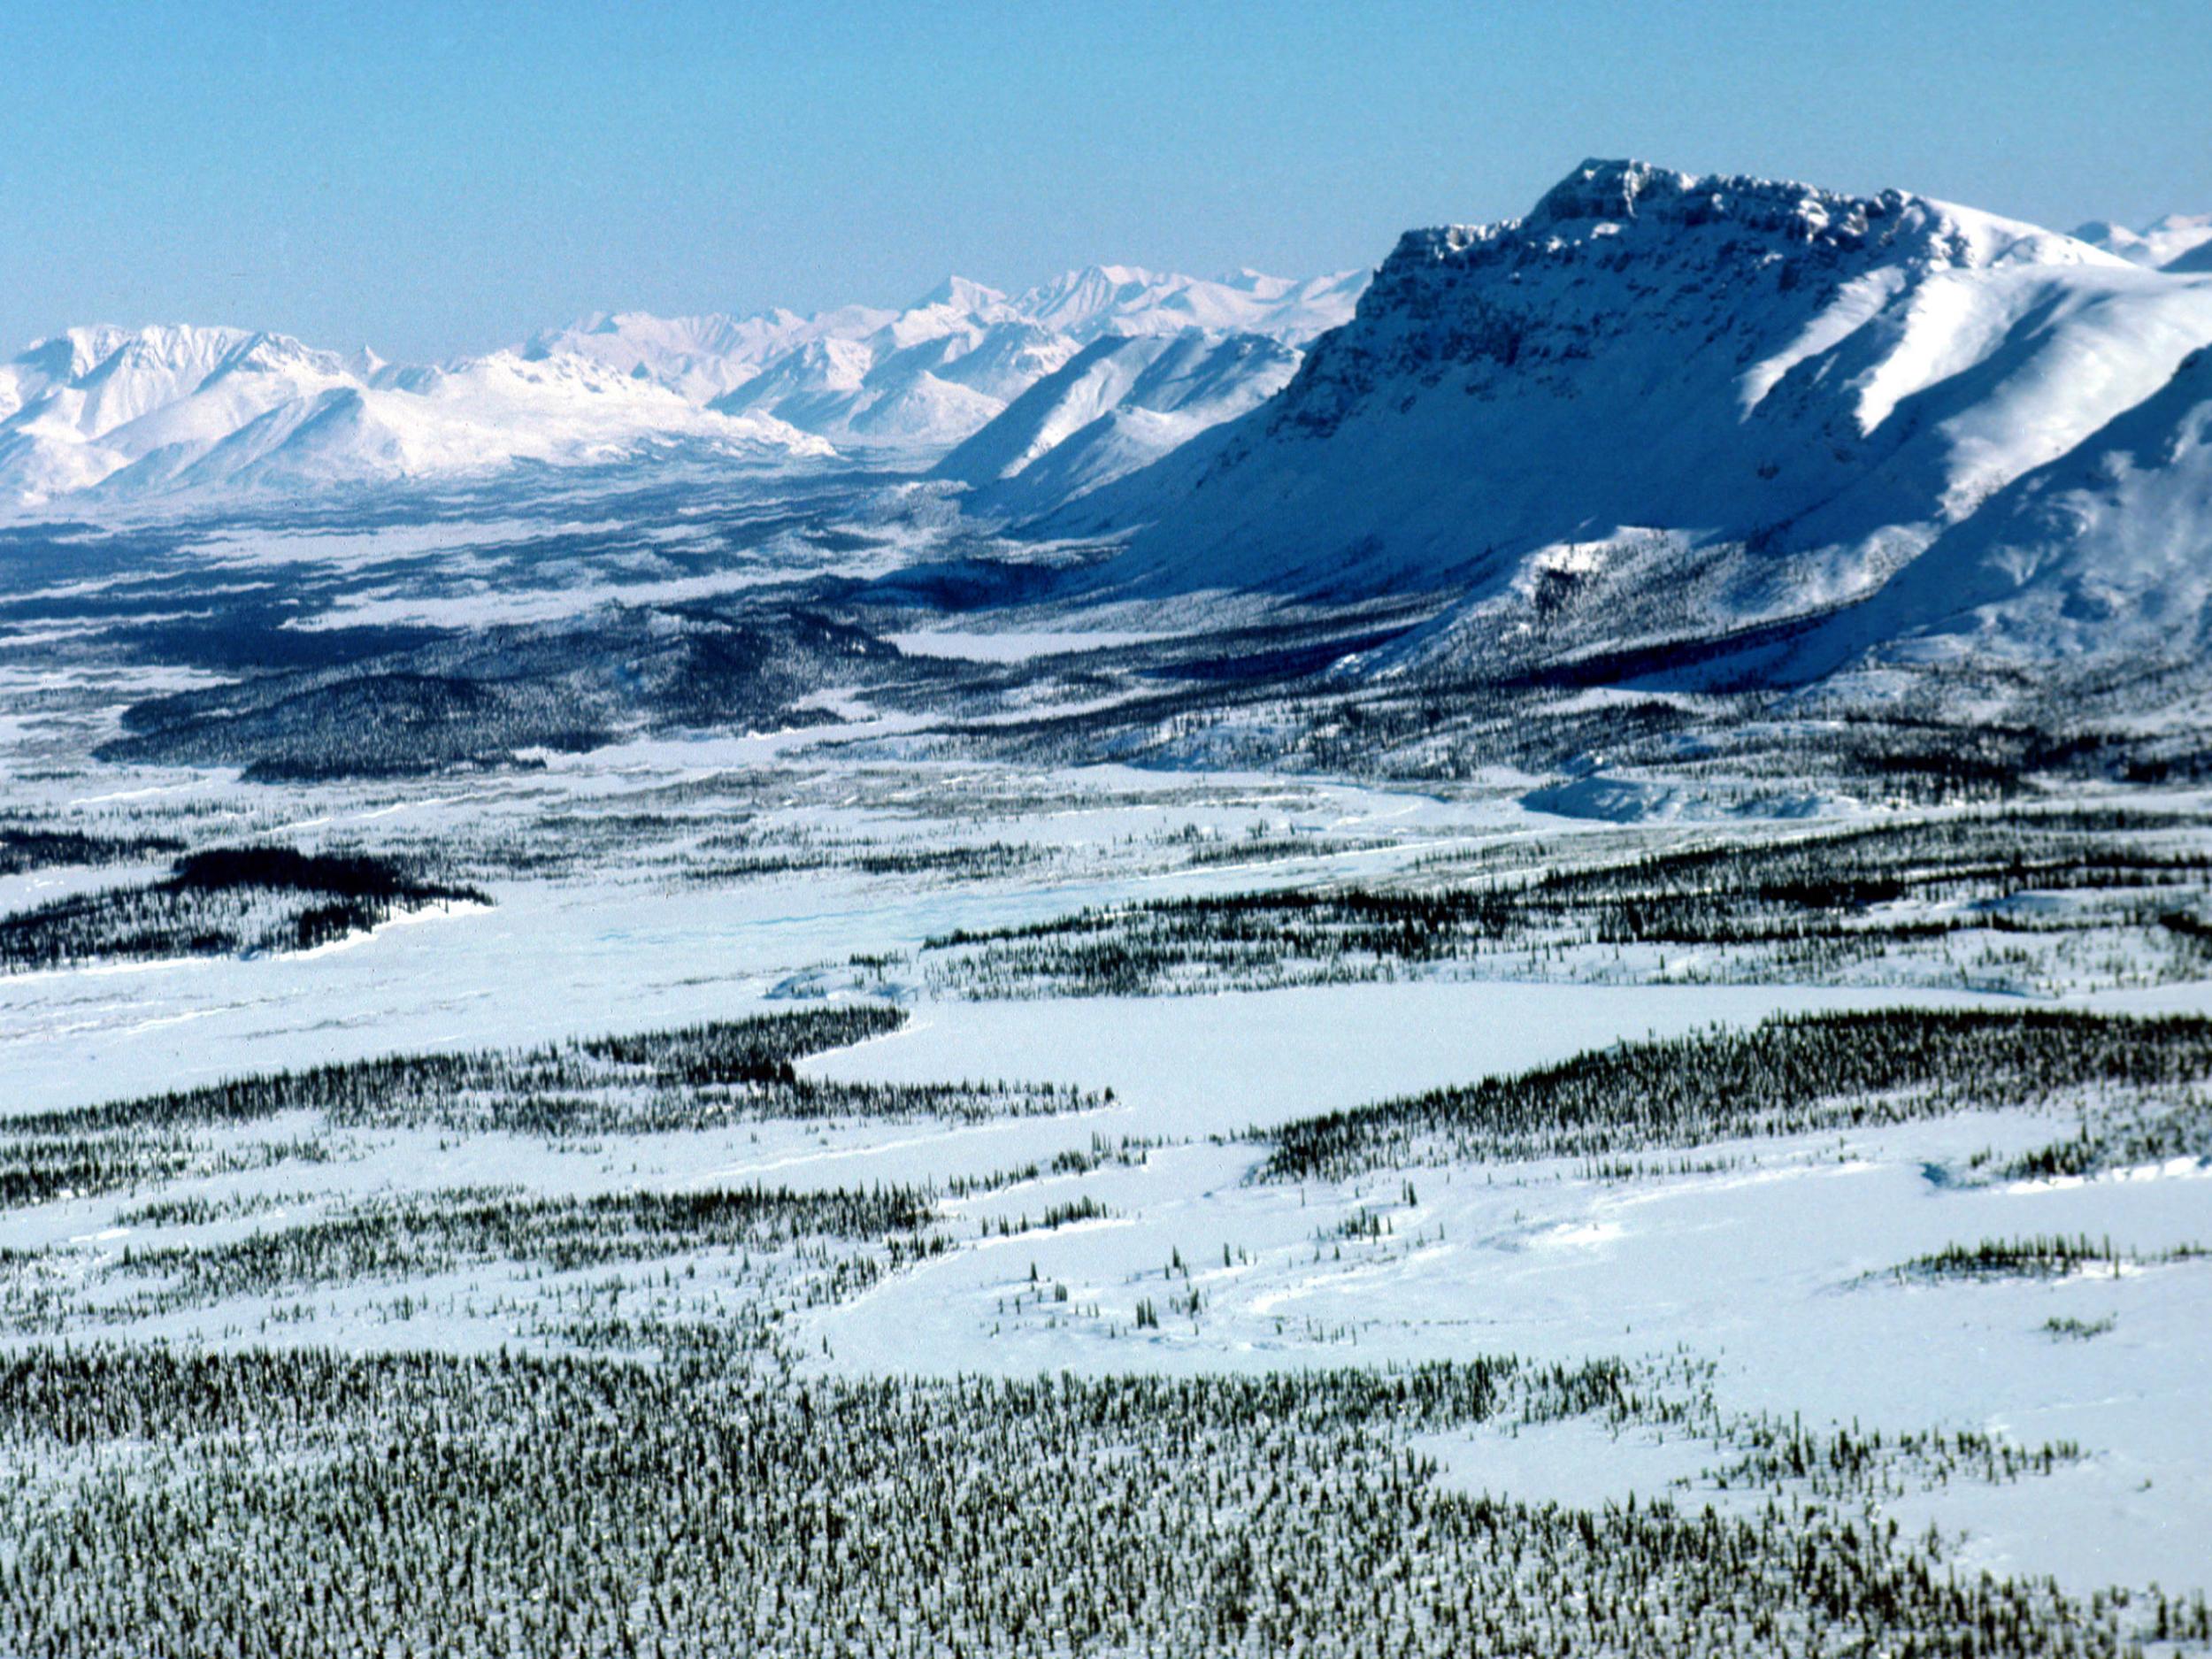 The effects of climate change are particularly pronounced in Arctic regions like Alaska